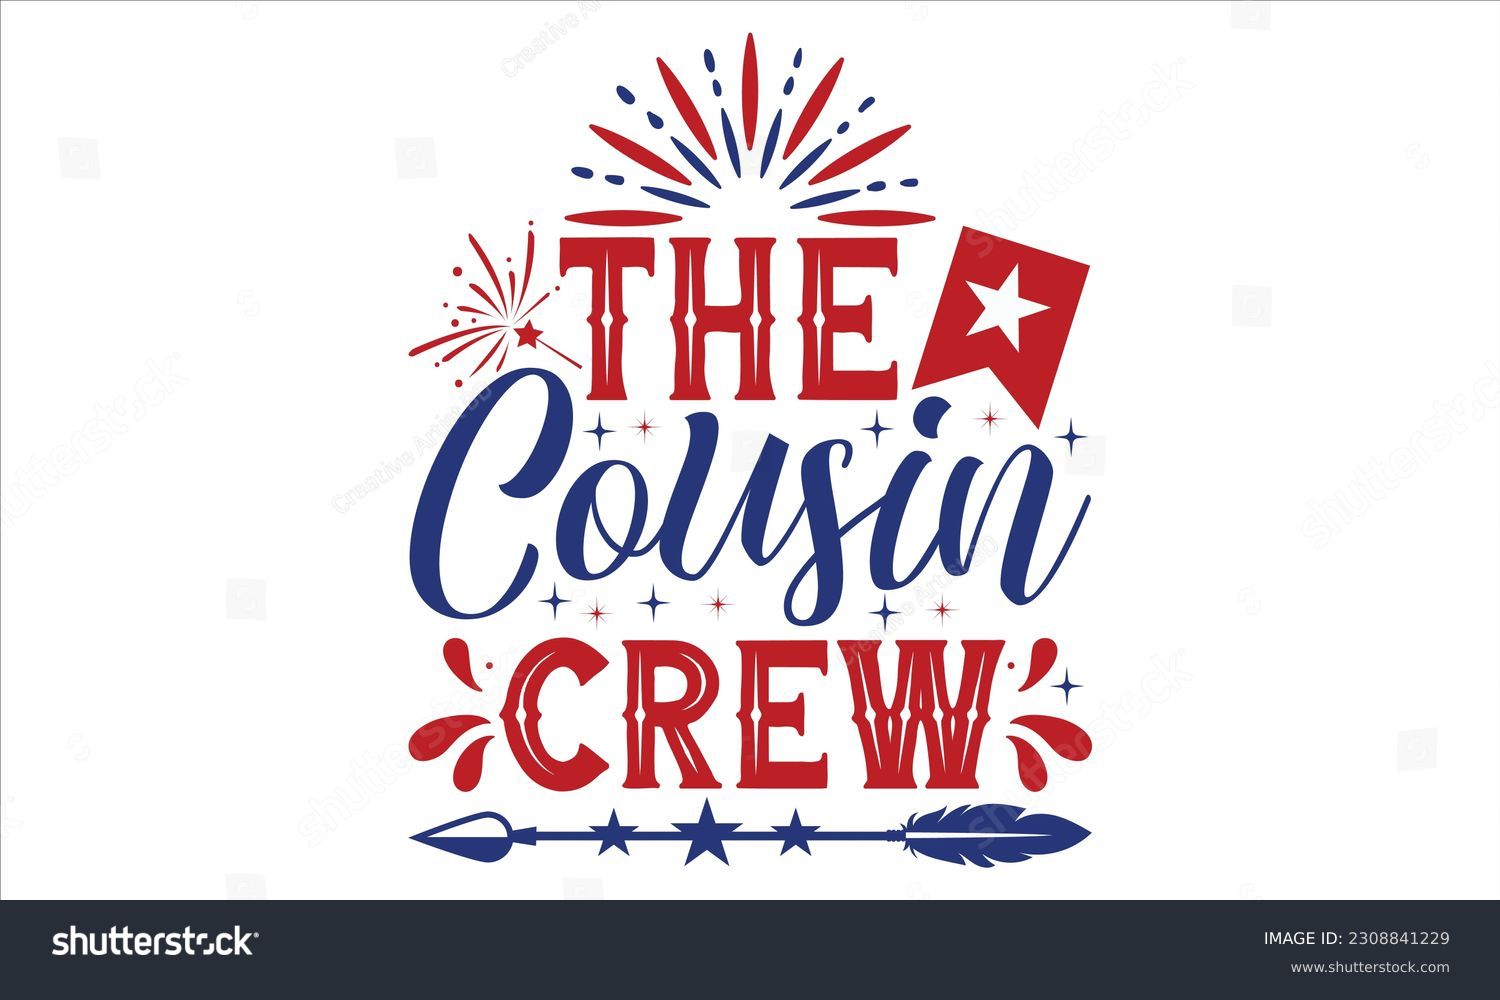 SVG of The Cousin Crew - Fourth Of July SVG Design, Hand lettering inspirational quotes isolated on white background, used for prints on bags, poster, banner, flyer and mug, pillows. svg